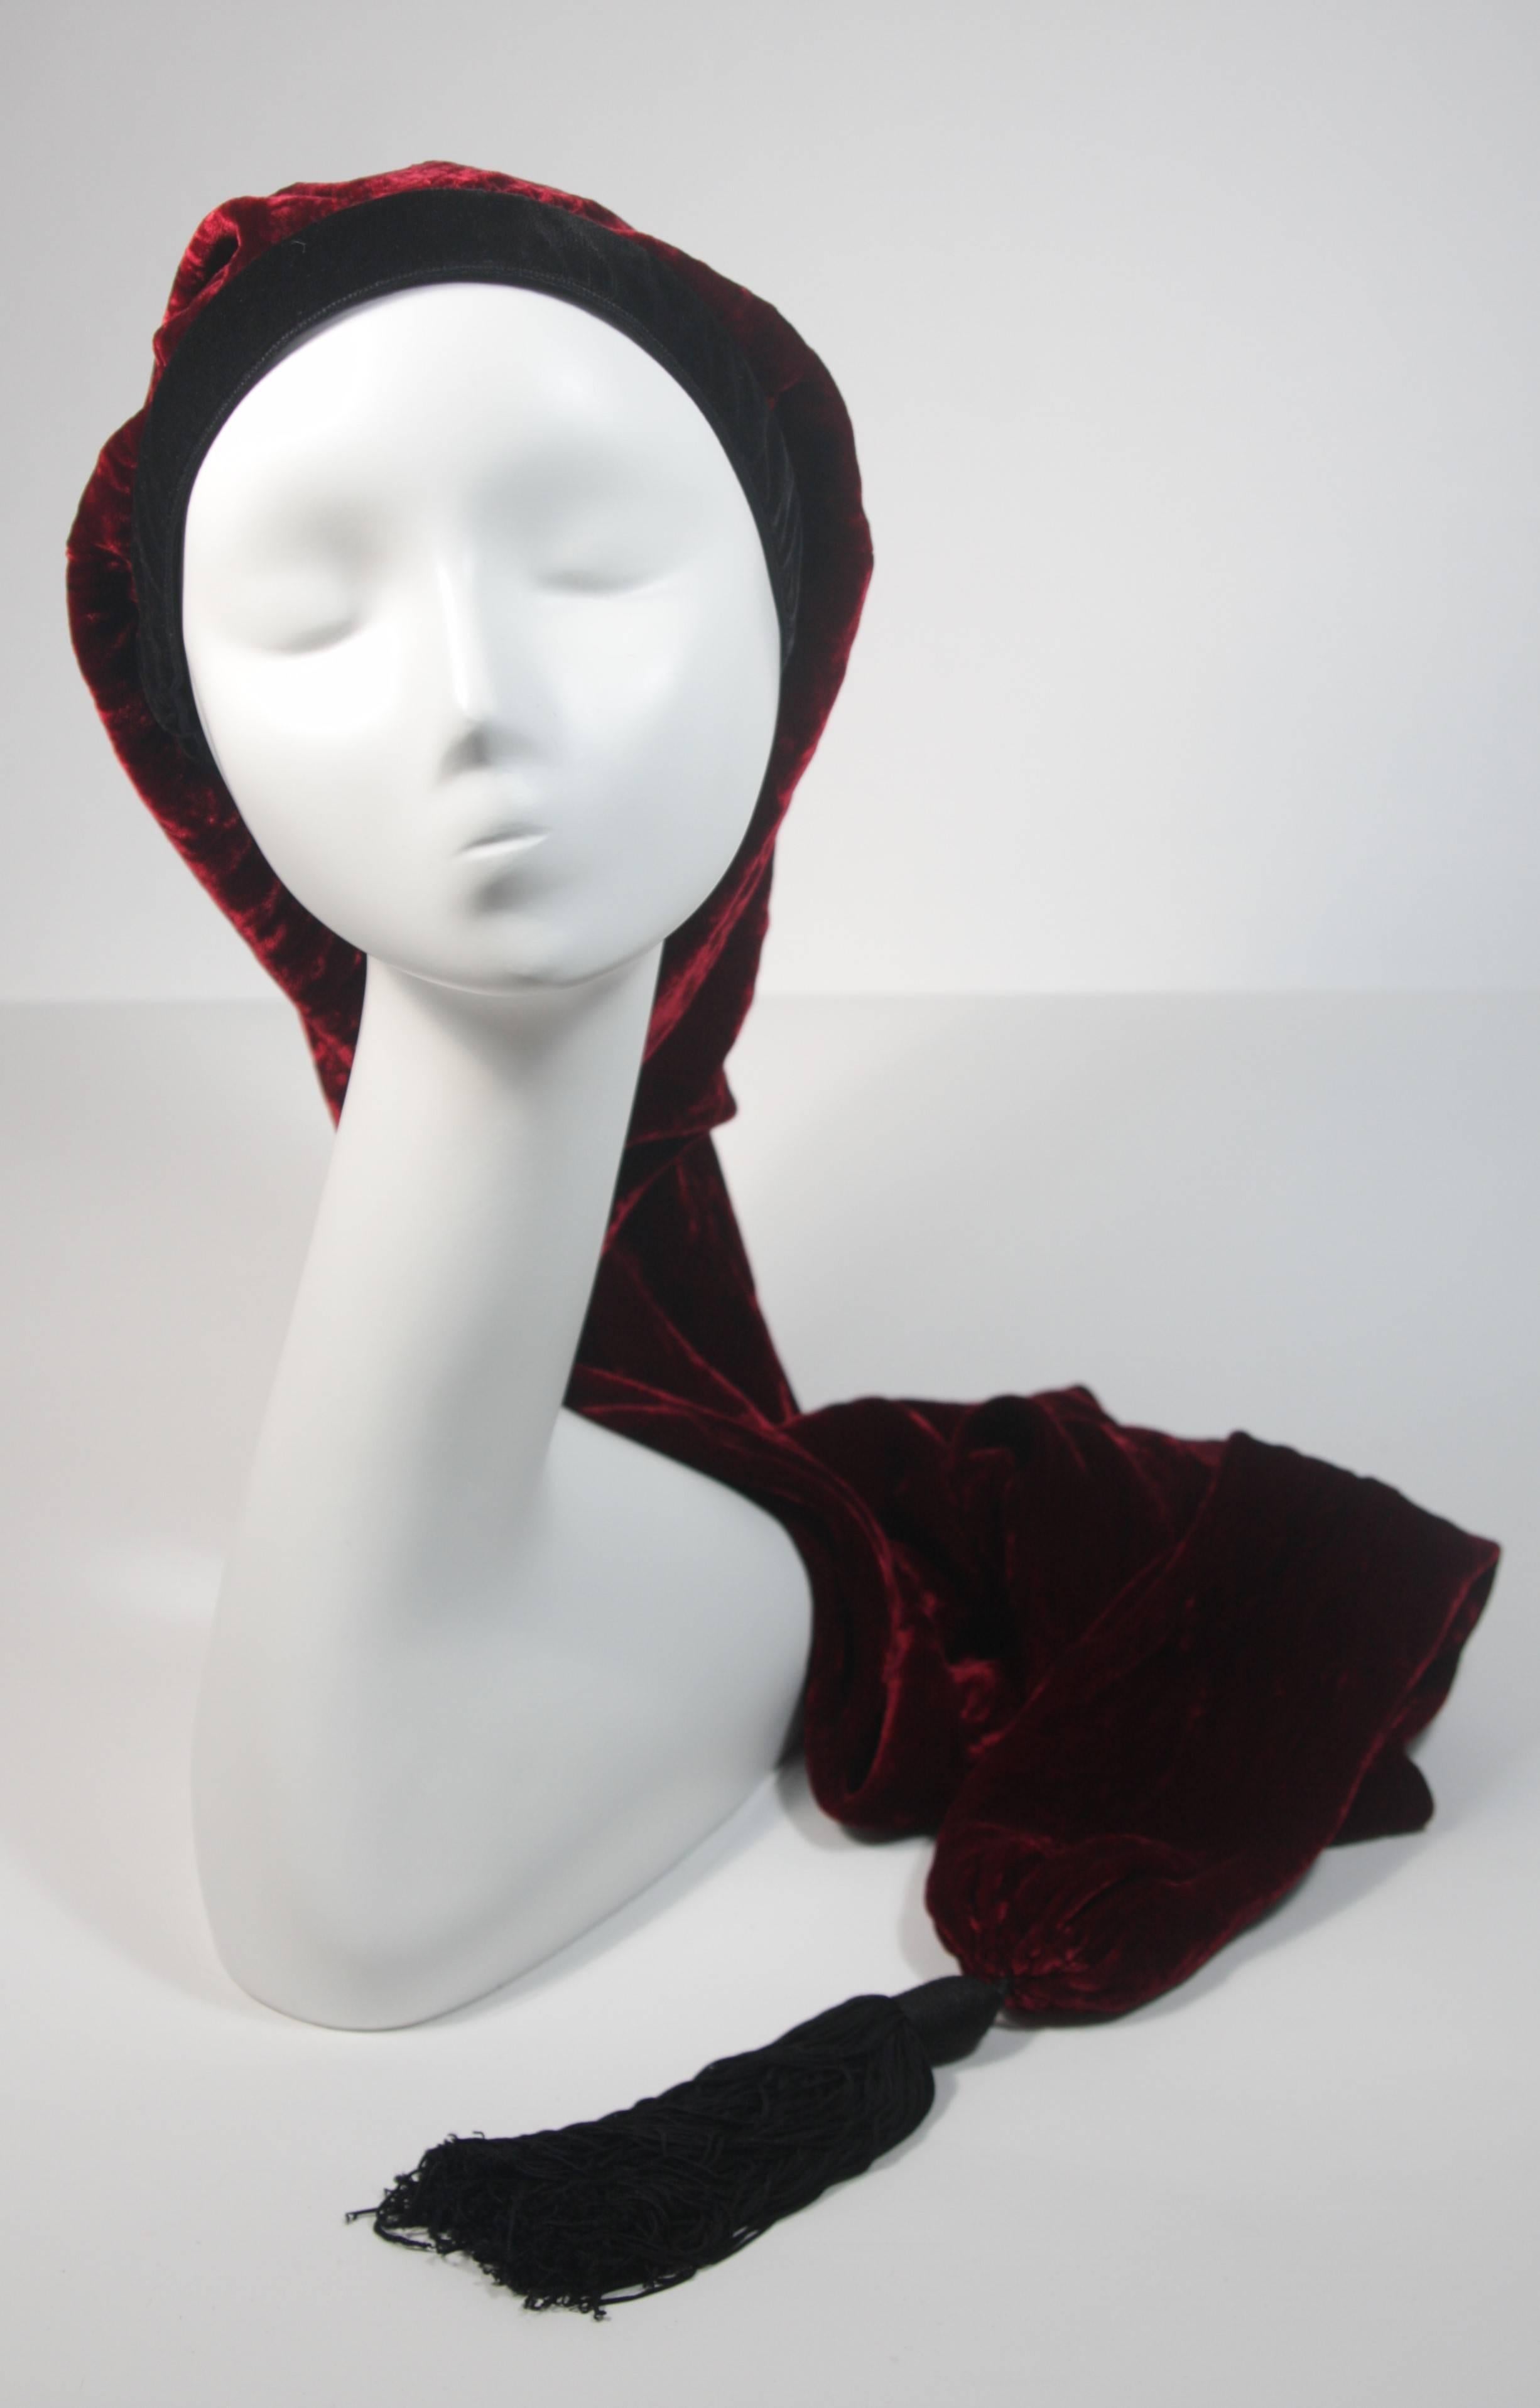 This Yves Saint Laurent Rive Gauche design is available for viewing at our Beverly Hills Boutique. We offer a large selection of evening gowns and luxury garments. 

 This hat is composed of wonderful burgundy velvet and features a tassel.